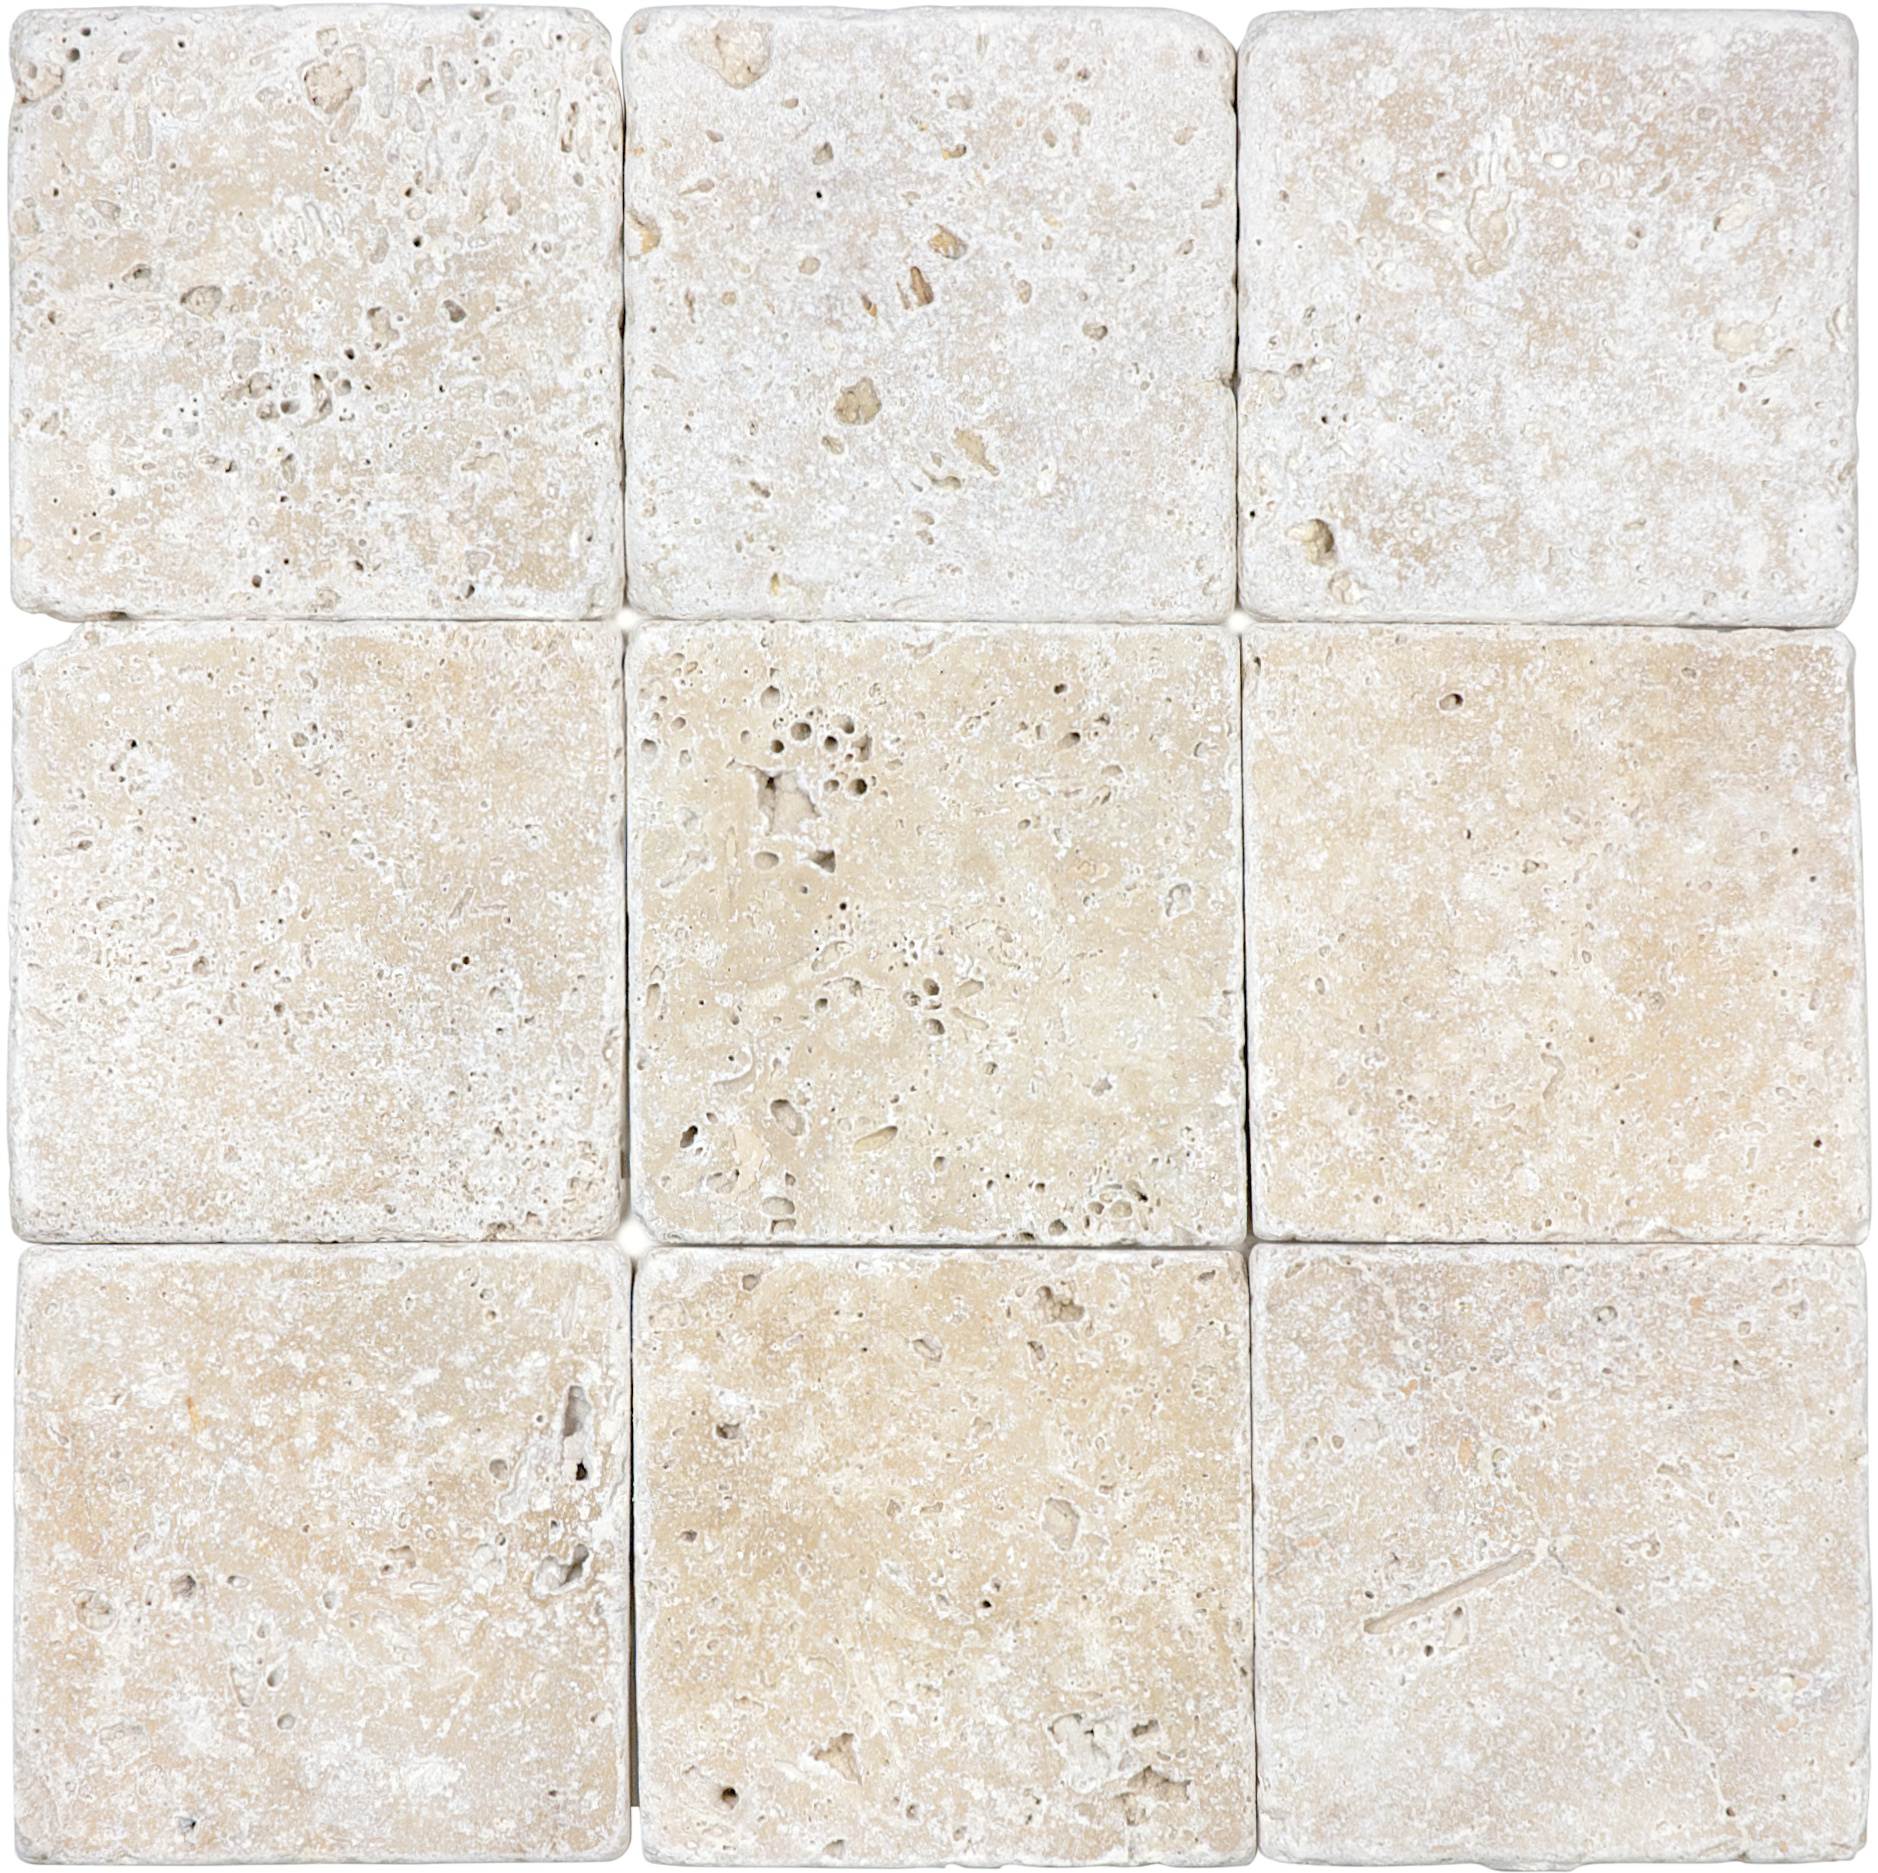 travertine pattern natural stone field tile from ivory anatolia collection distributed by surface group international tumbled finish tumbled edge 4x4 square shape